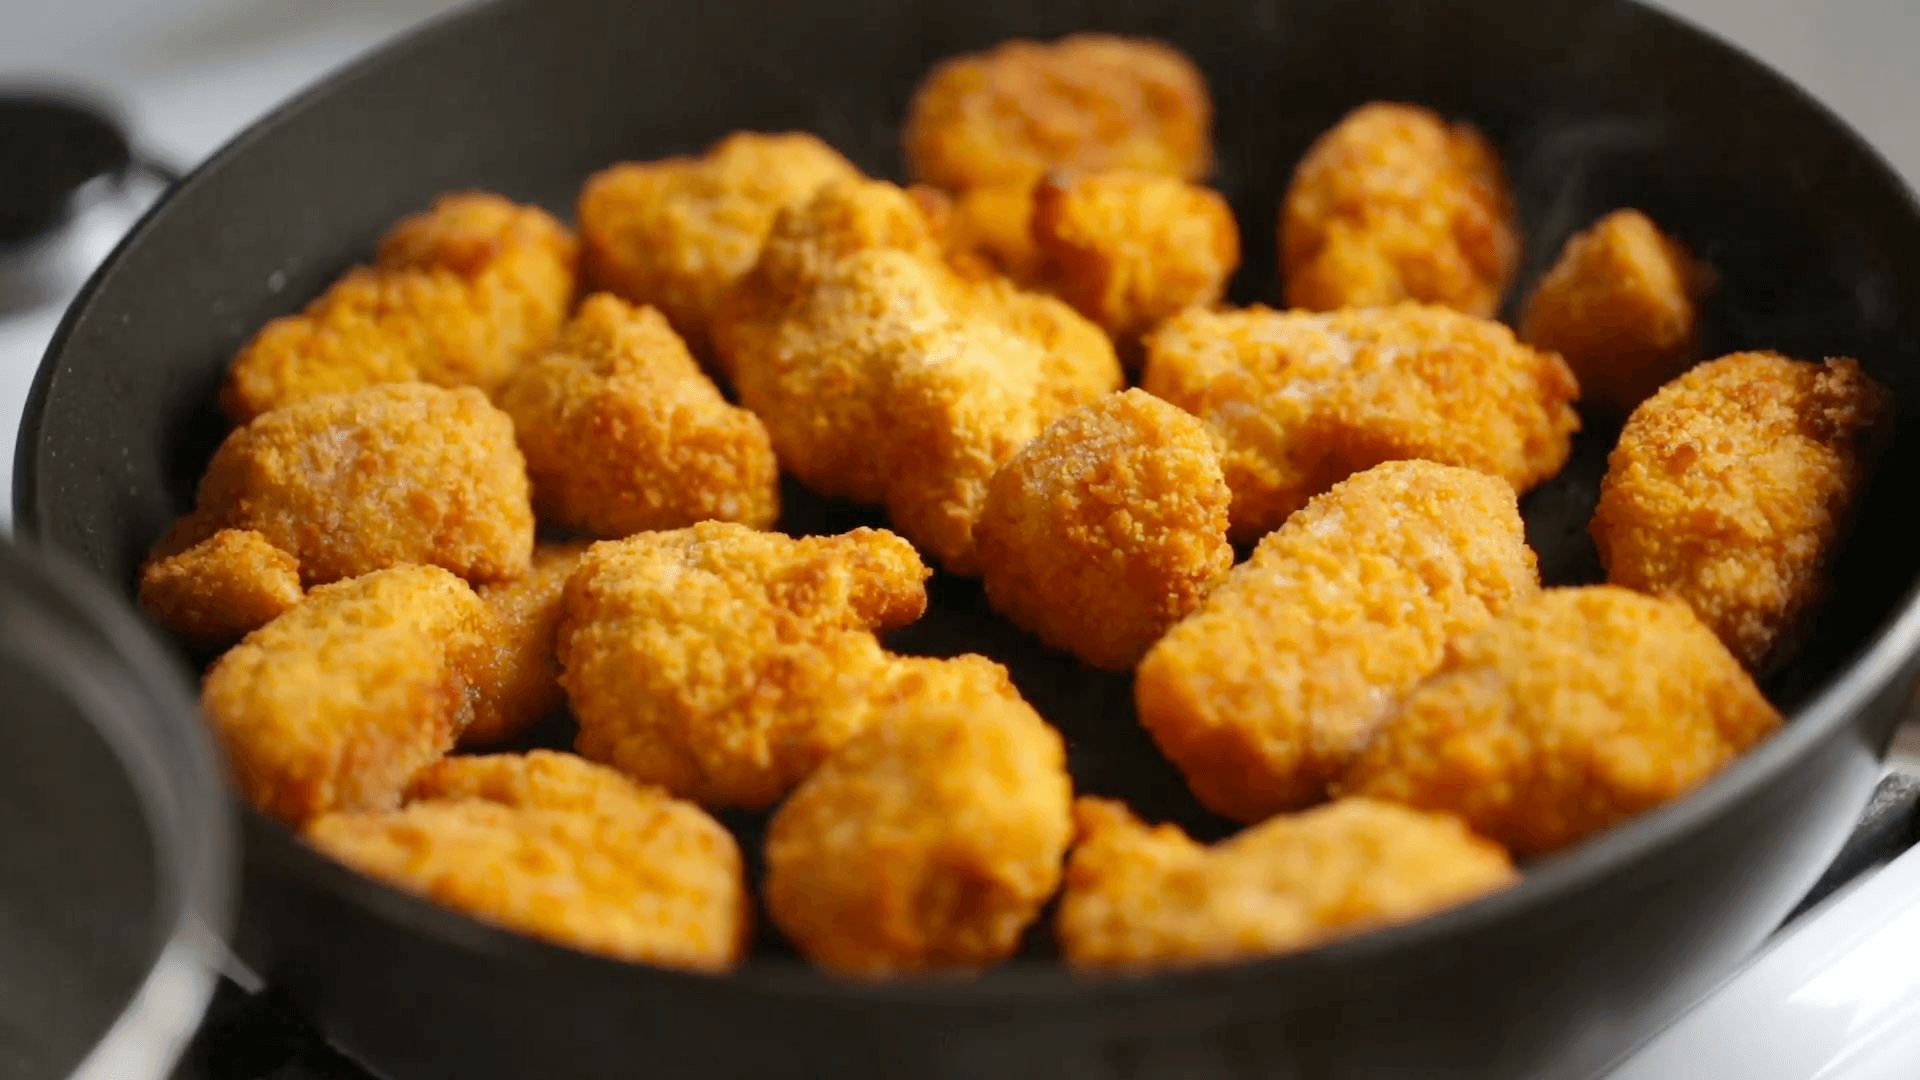 Chicken Nugget Wallpapers